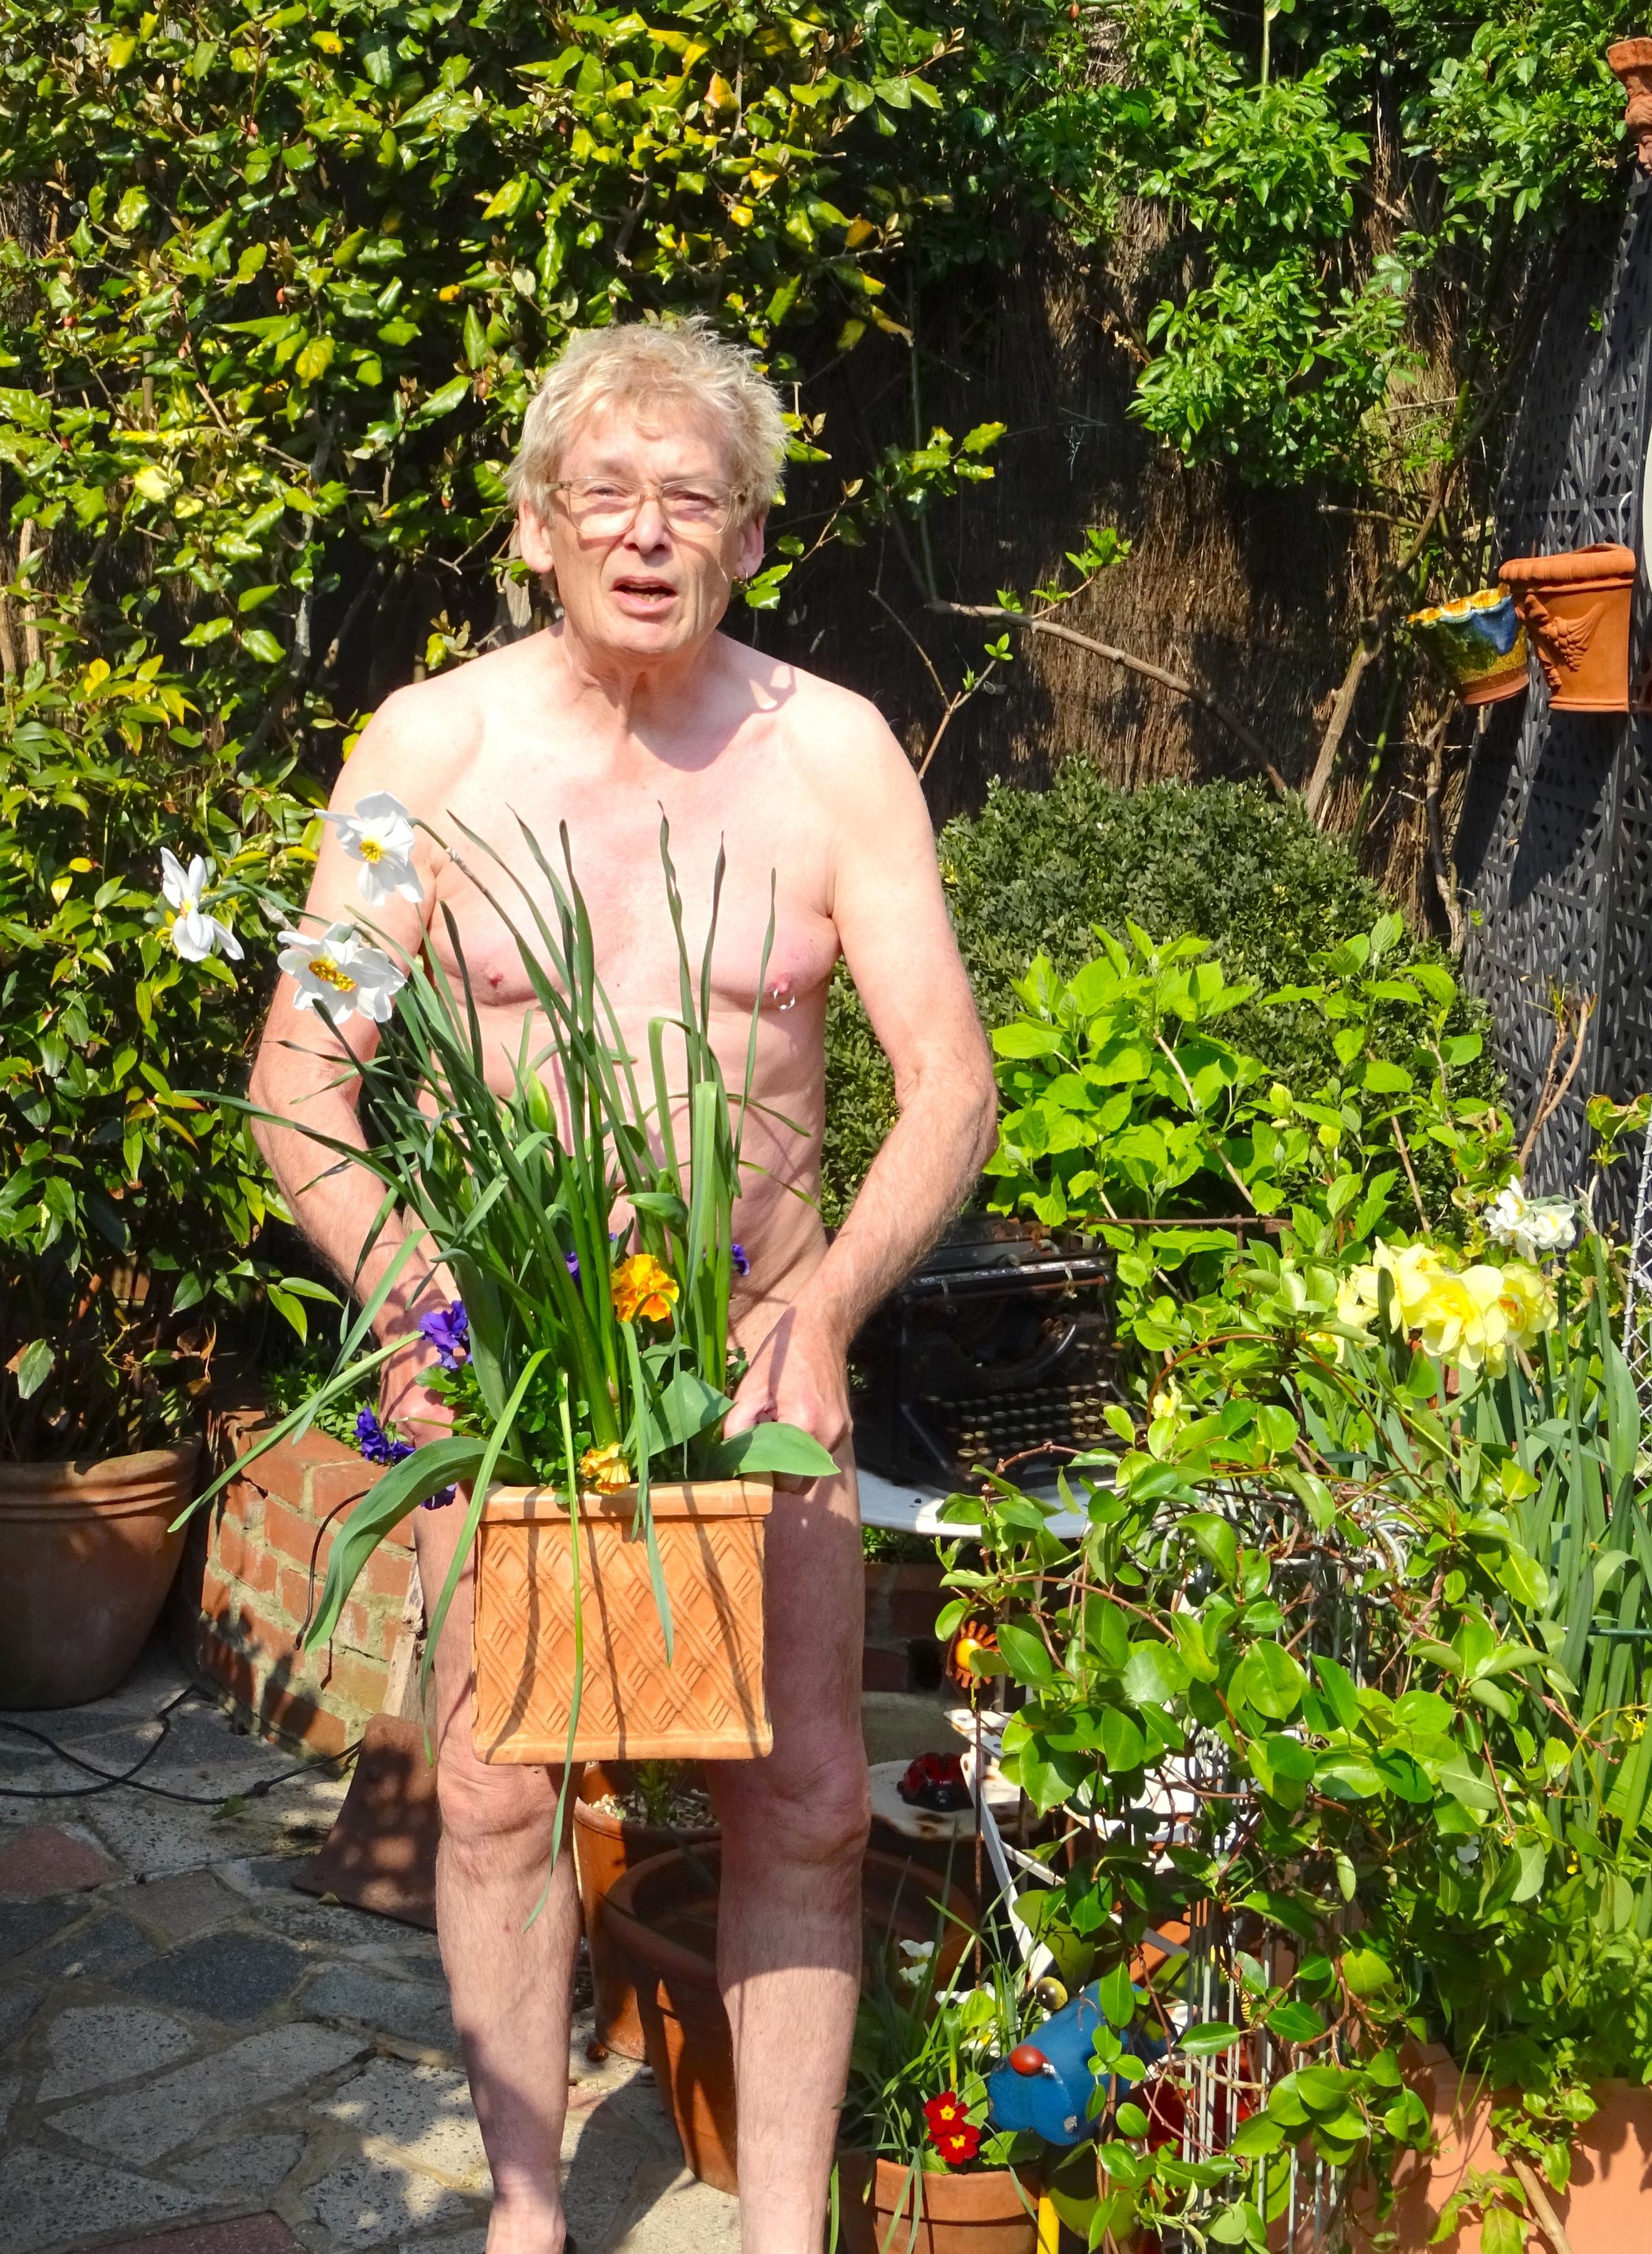 Geoff Stonebanks joins in on World Naked Gardening Day